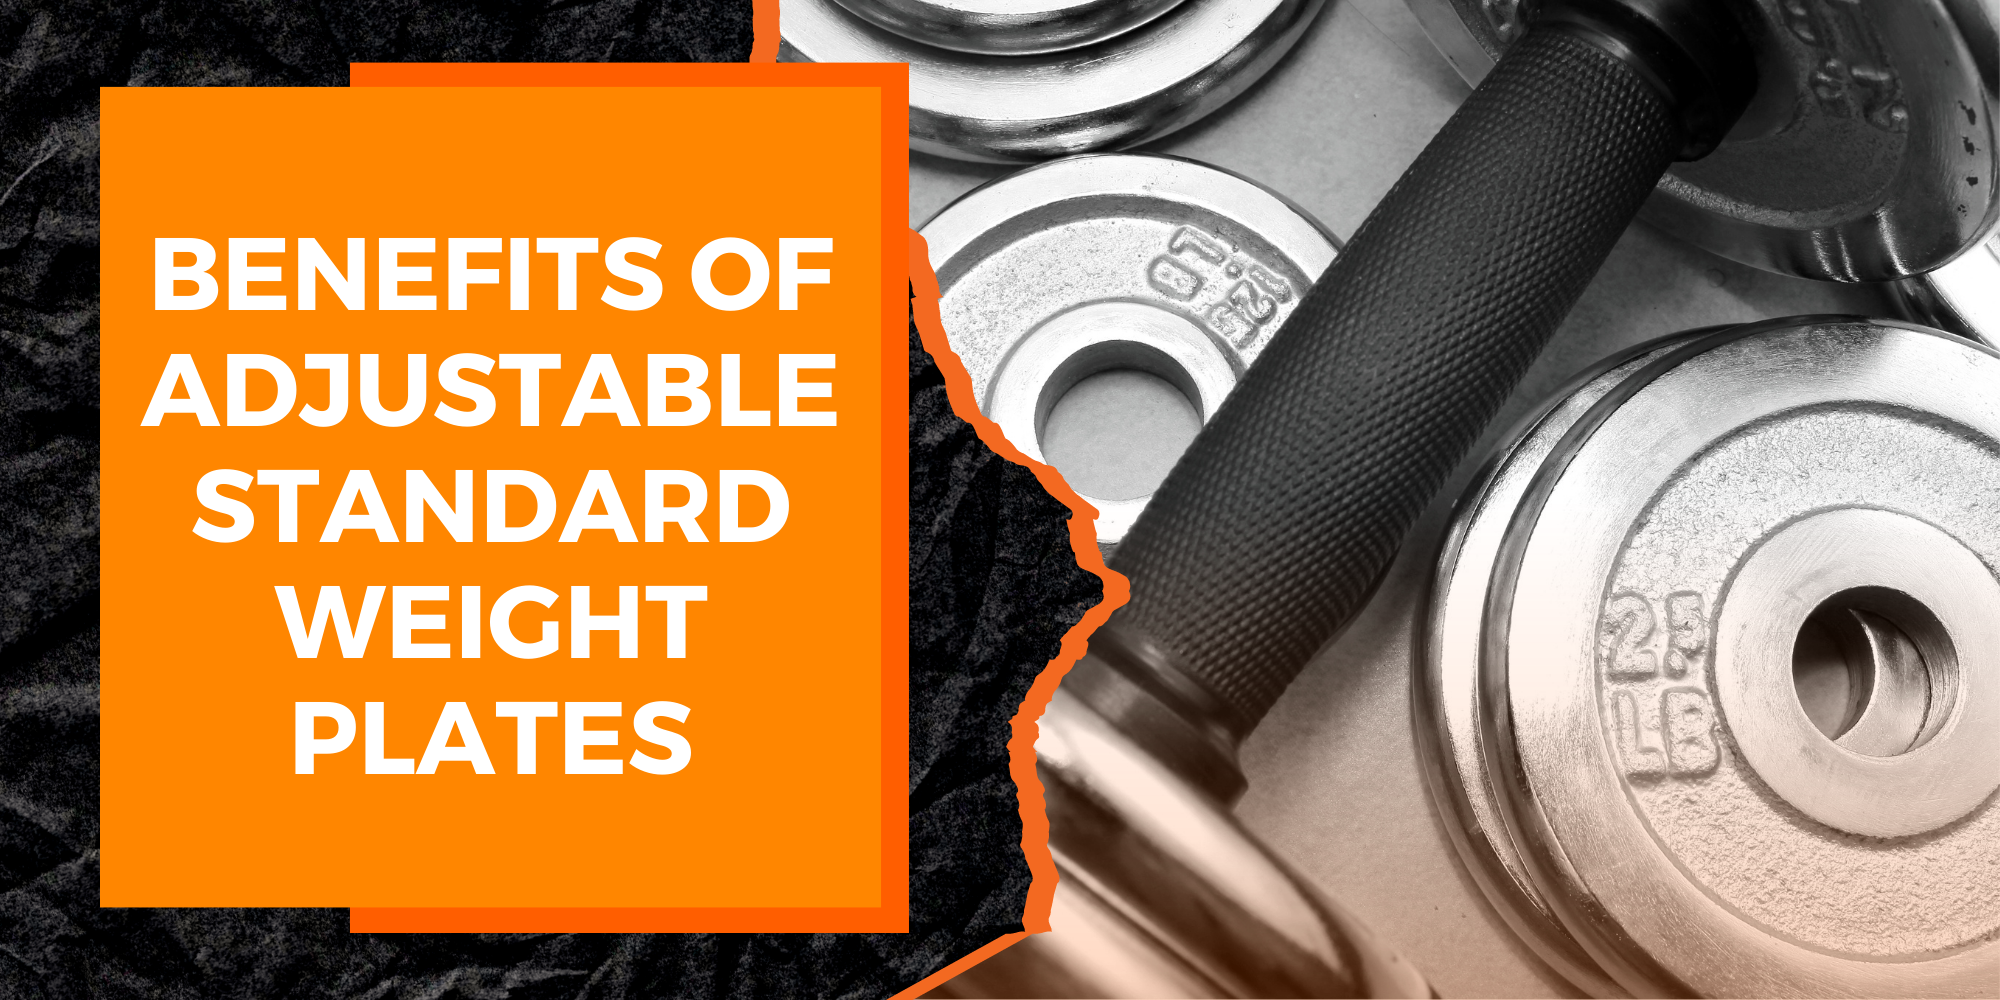 The Benefits of Adjustable Standard Weight Plates